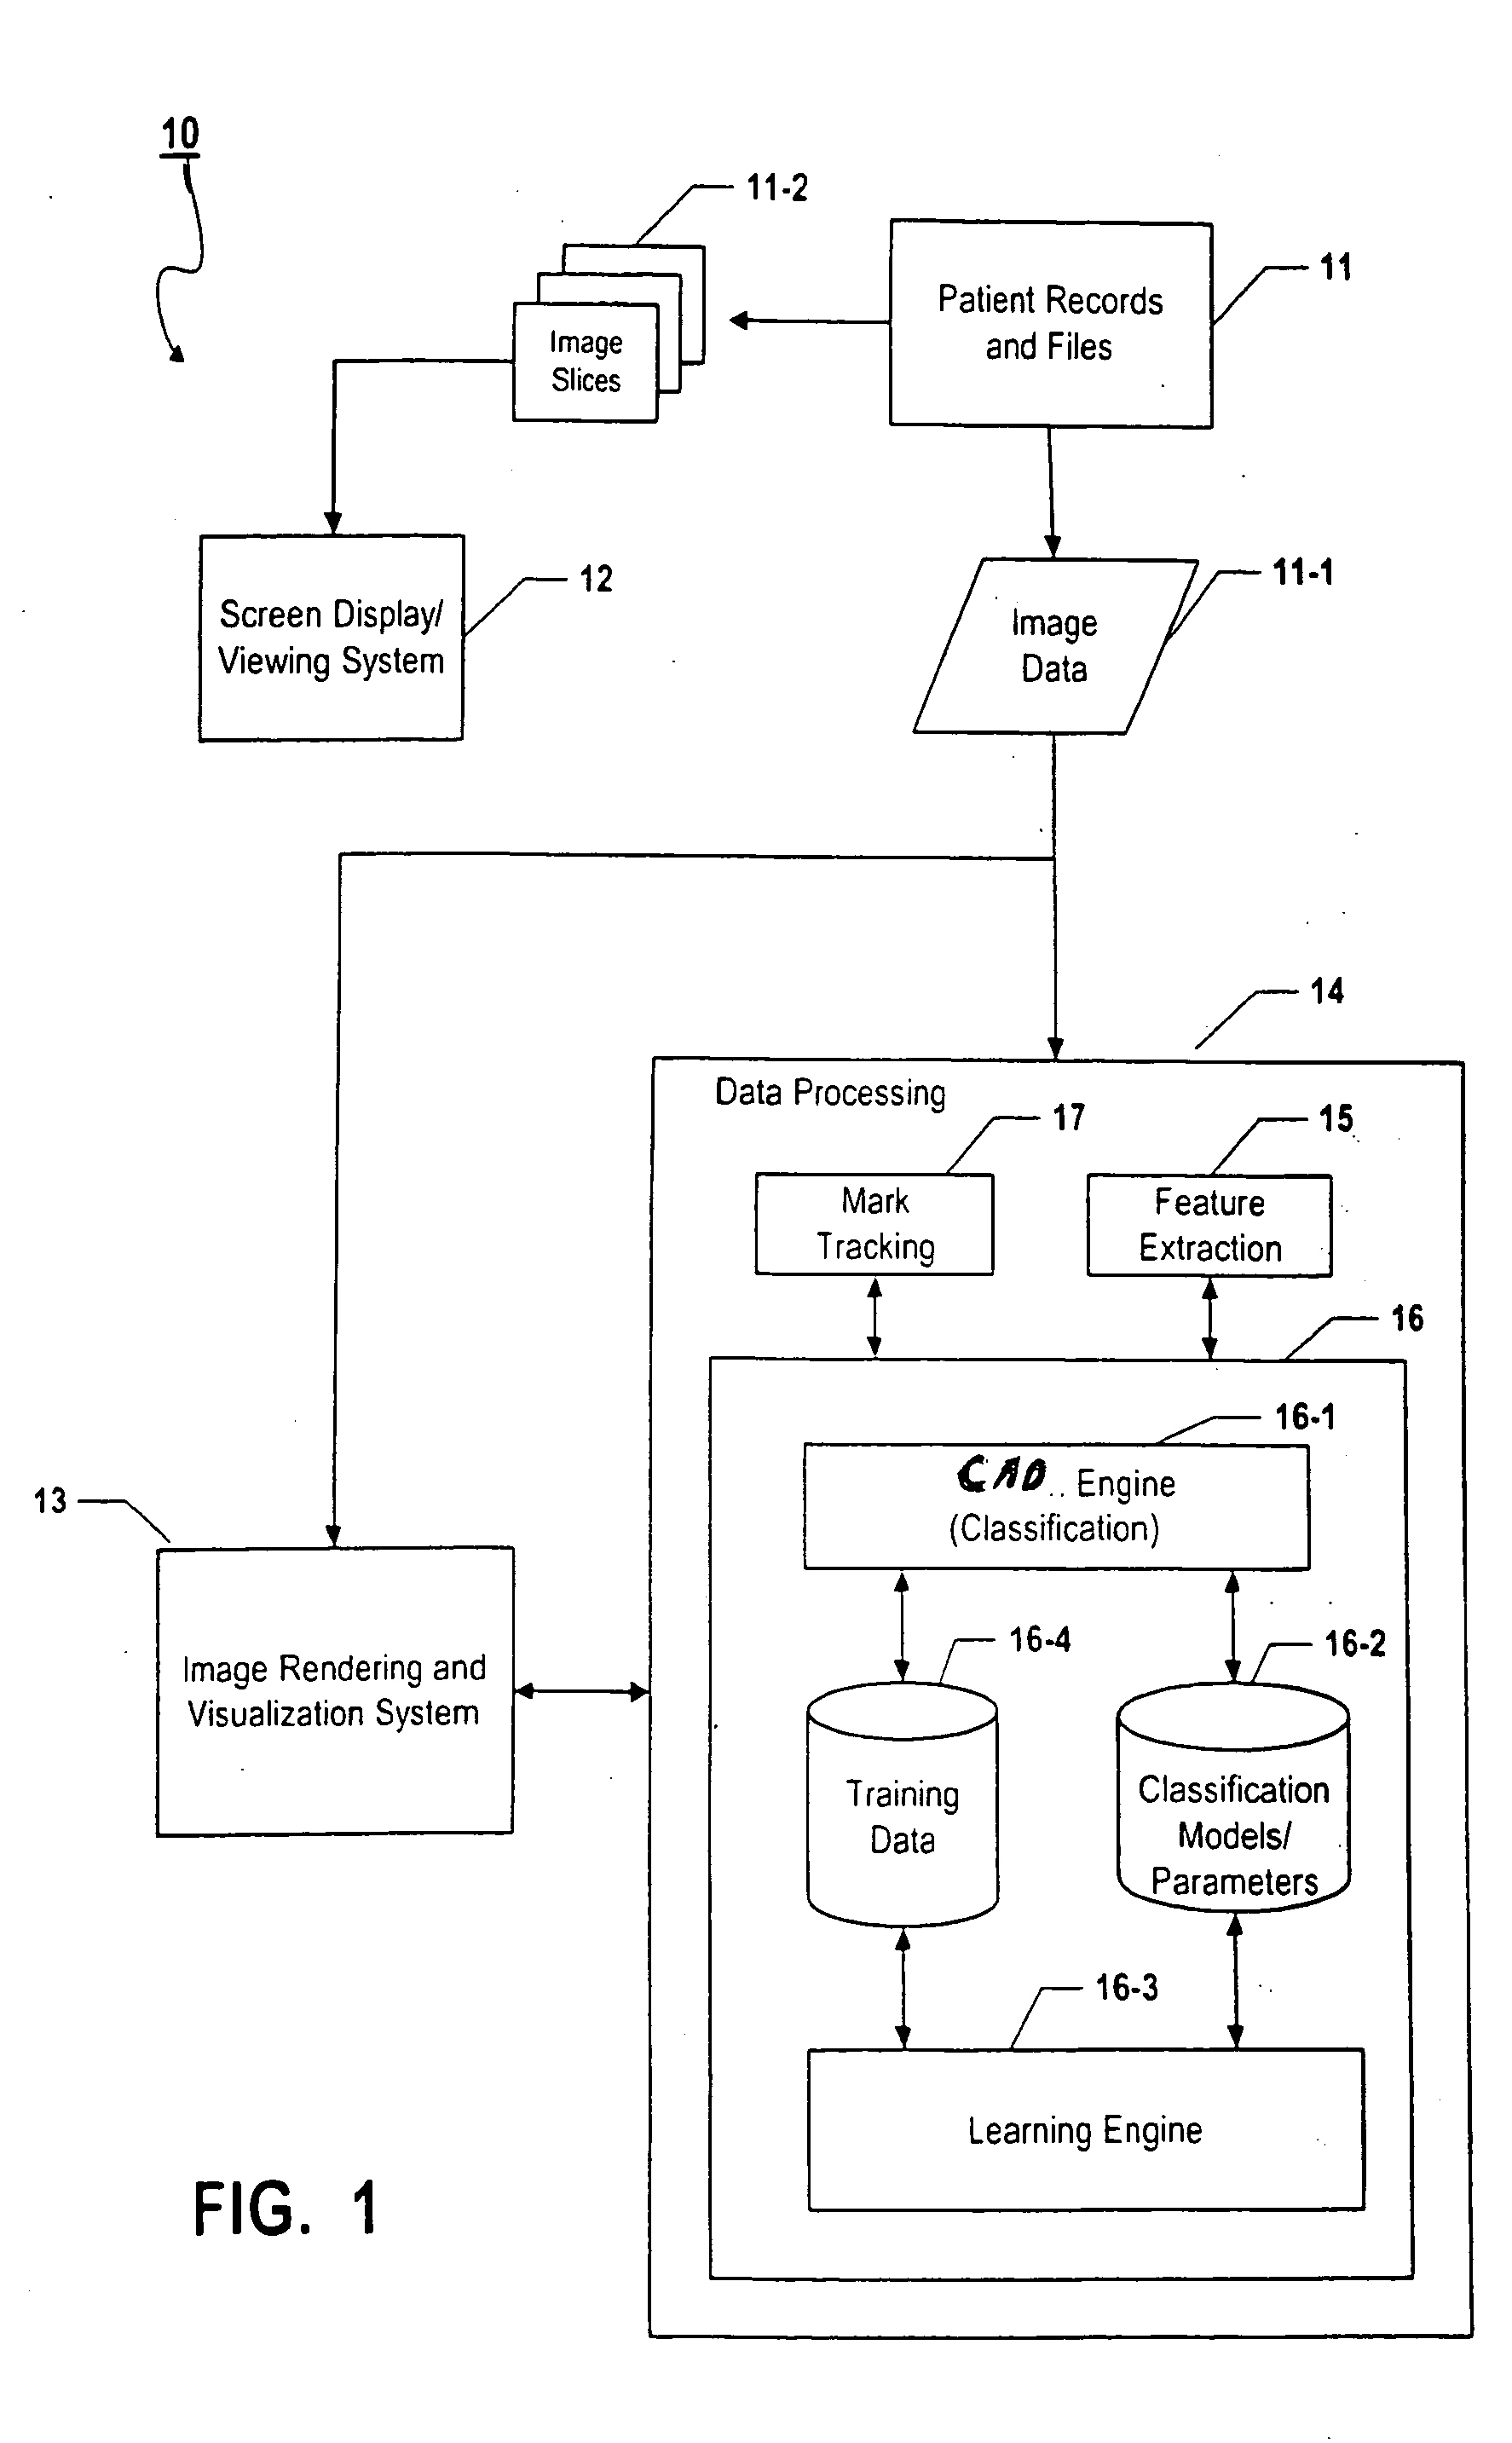 CAD (computer-aided decision) support for medical imaging using machine learning to adapt CAD process with knowledge collected during routine use of CAD system